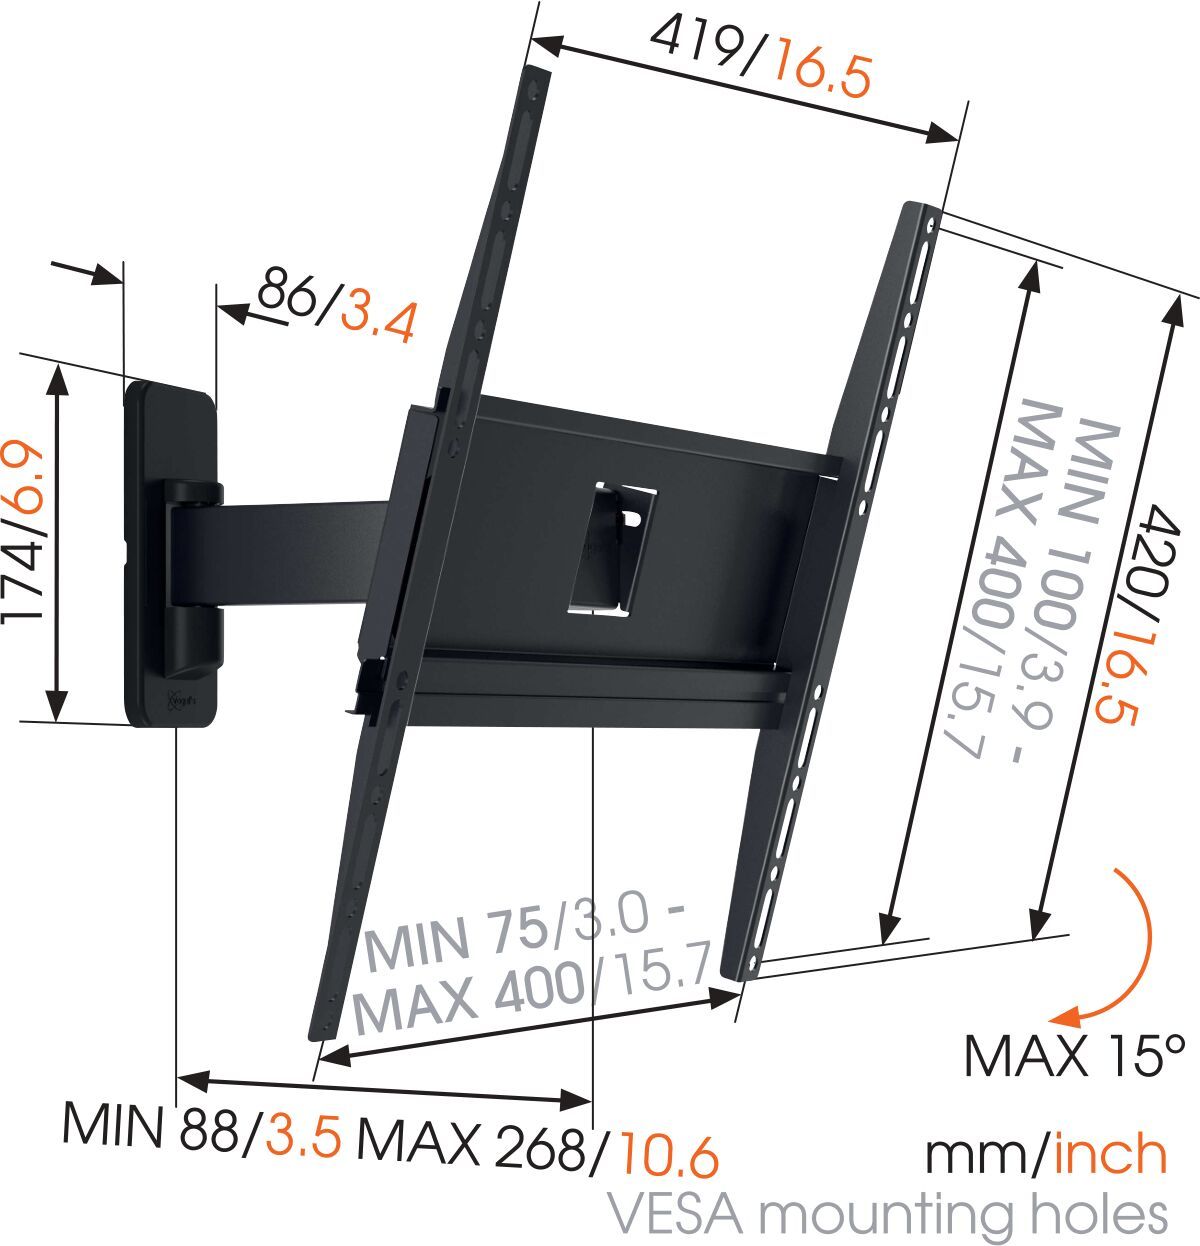 Vogel's MA3030-A1 Full Motion TV Wall Mount